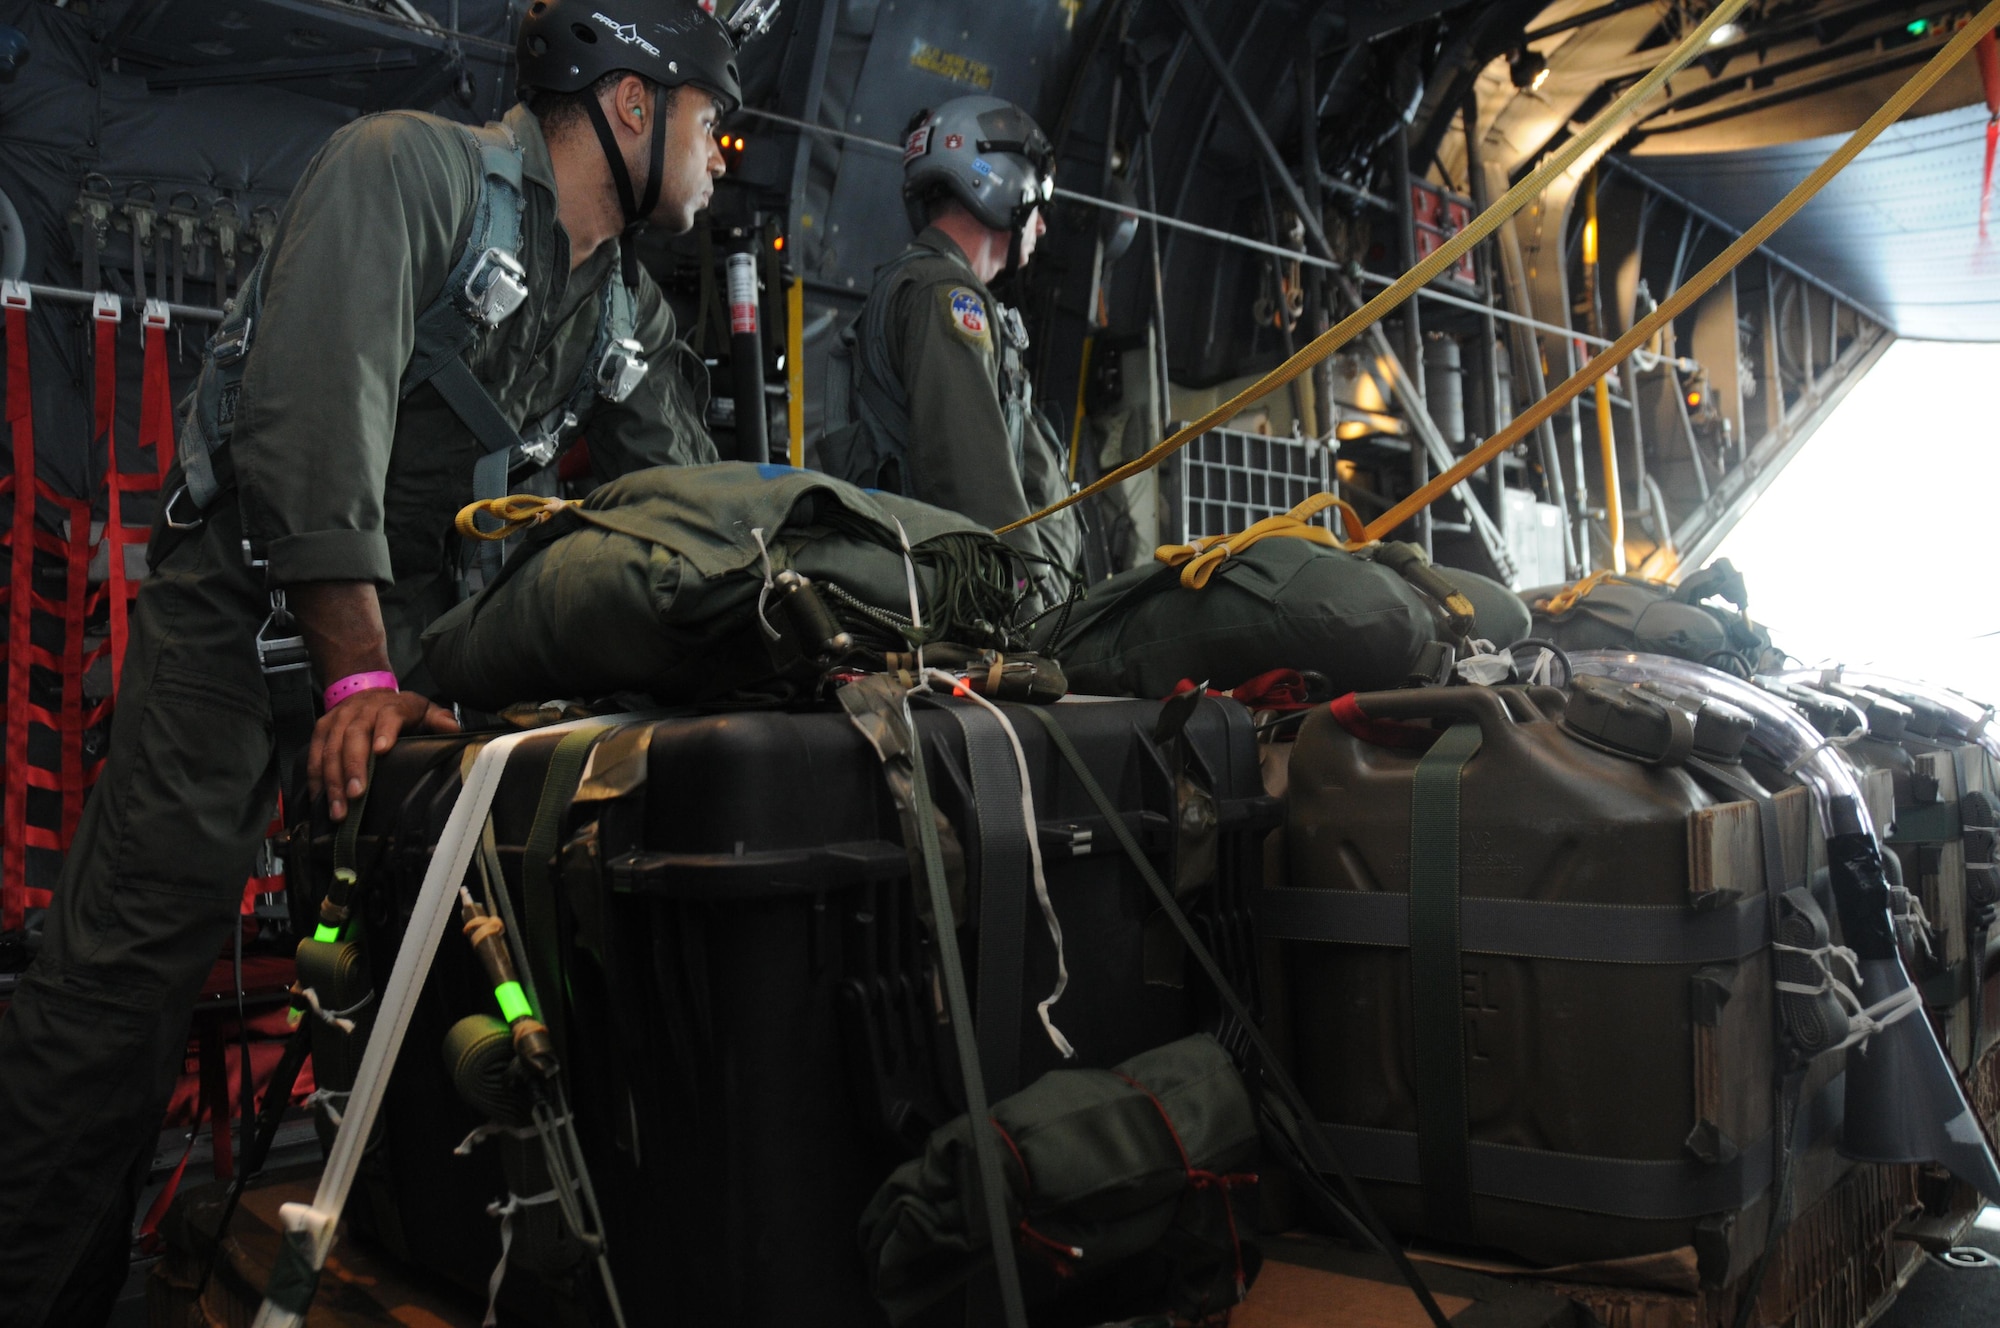 Members of joint forces and the 700th Airlift Squadron prepare pallets before dropping them out of a C-130 Hercules over the Pacific Ocean on Jan. 29, 2016. The pallets were full of supples that were being dropped to rafts. (U.S. Air Force Photo by Senior Airman Miles Wilson)